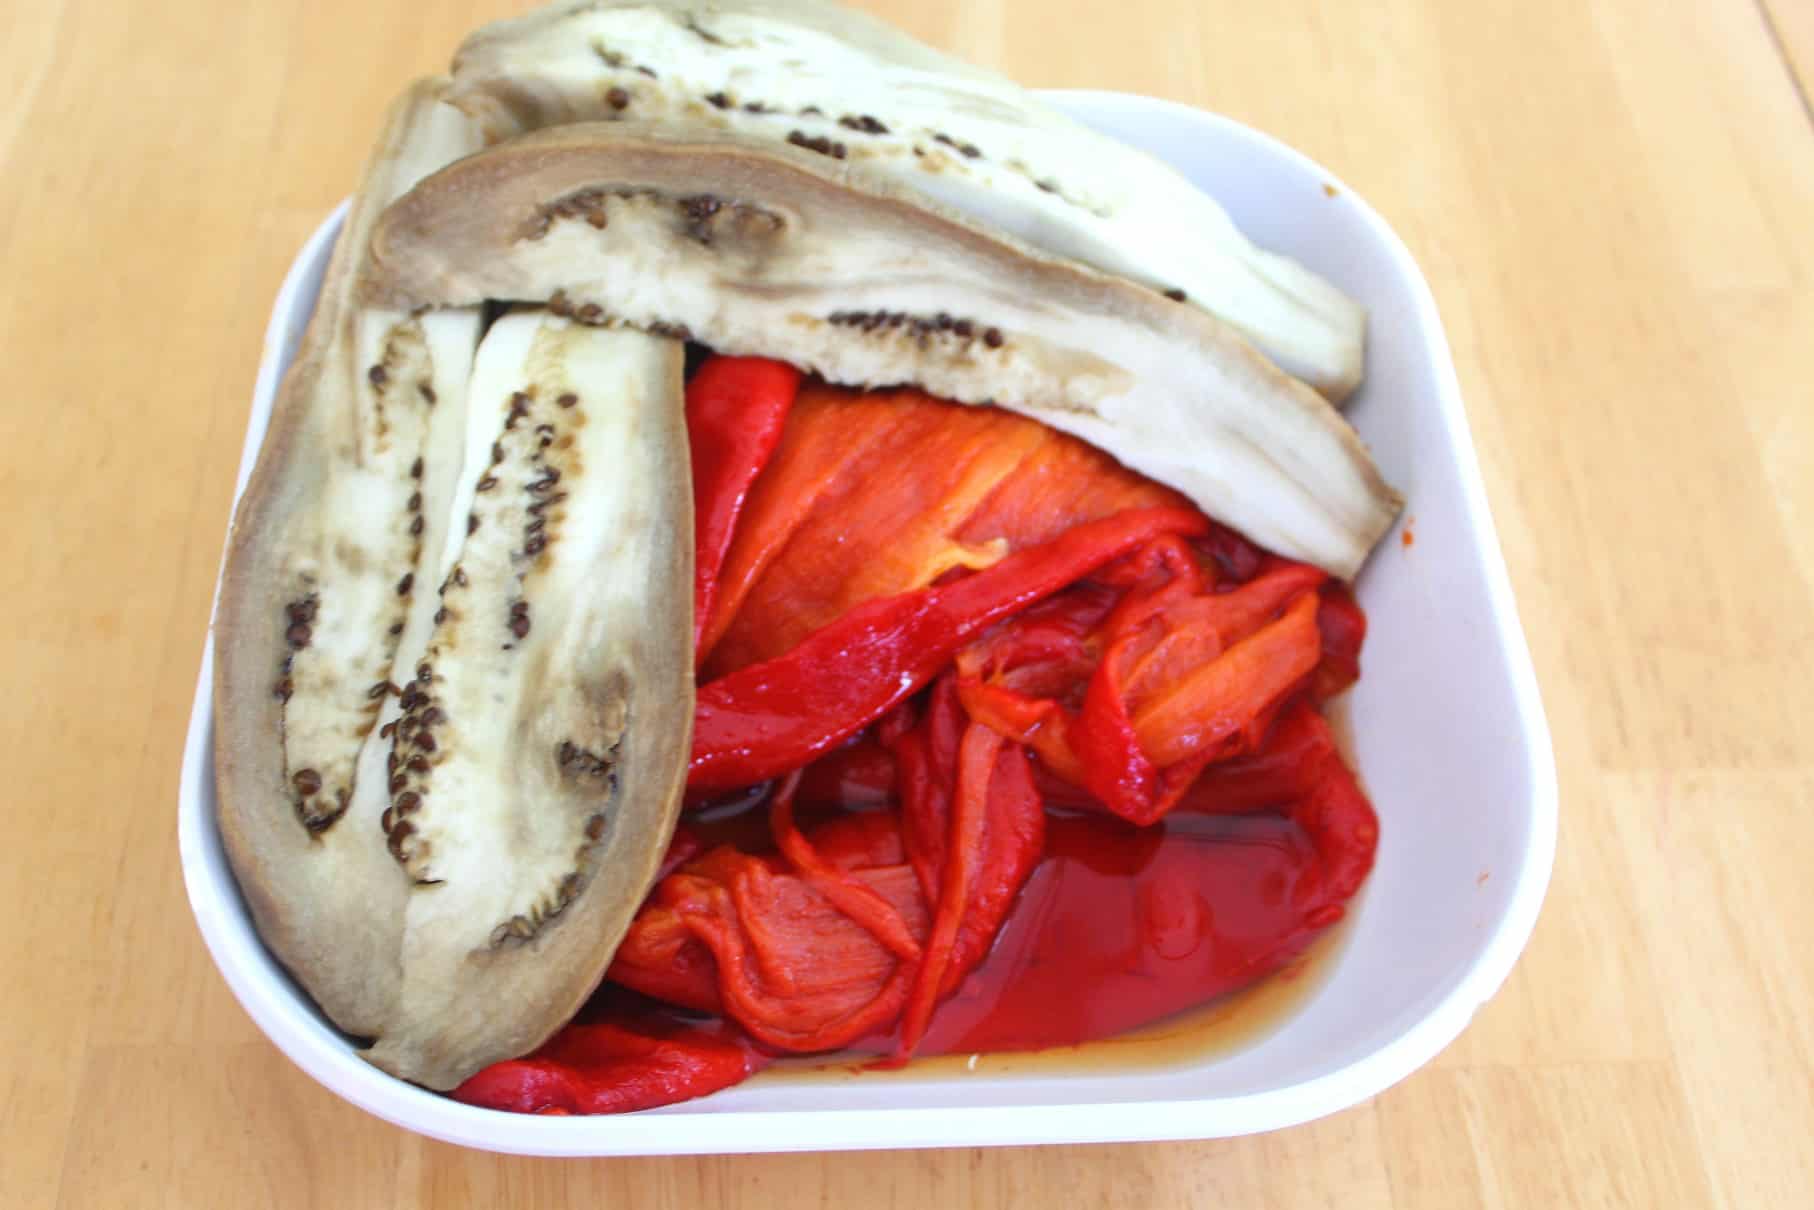 Peeled red peppers and eggplant on a plate.